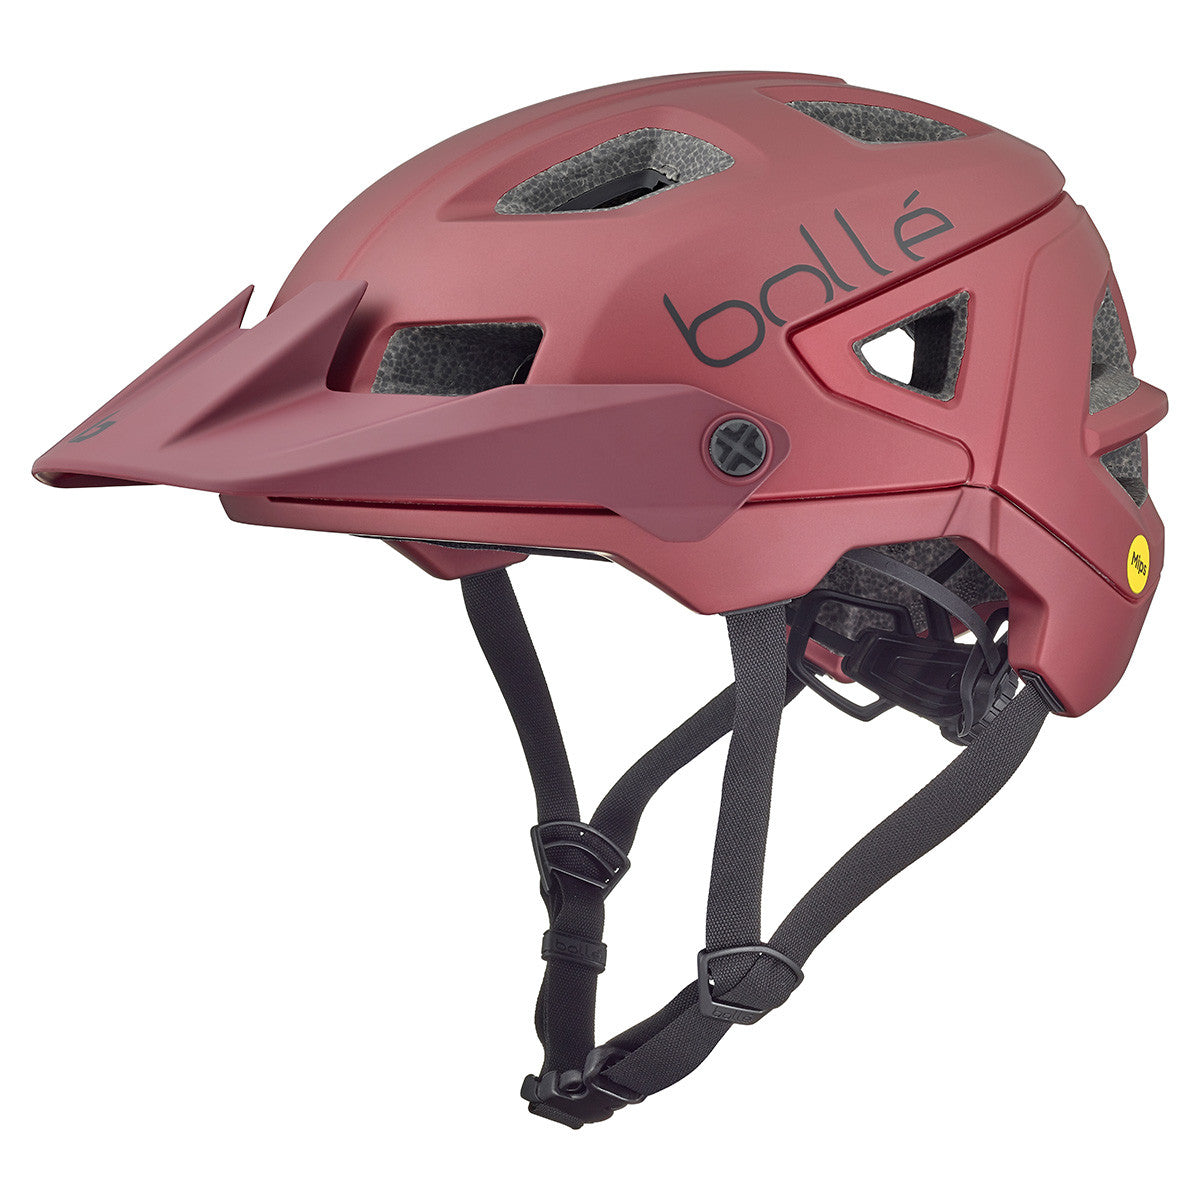 Bolle Trackdown Mips Cycling Helmet